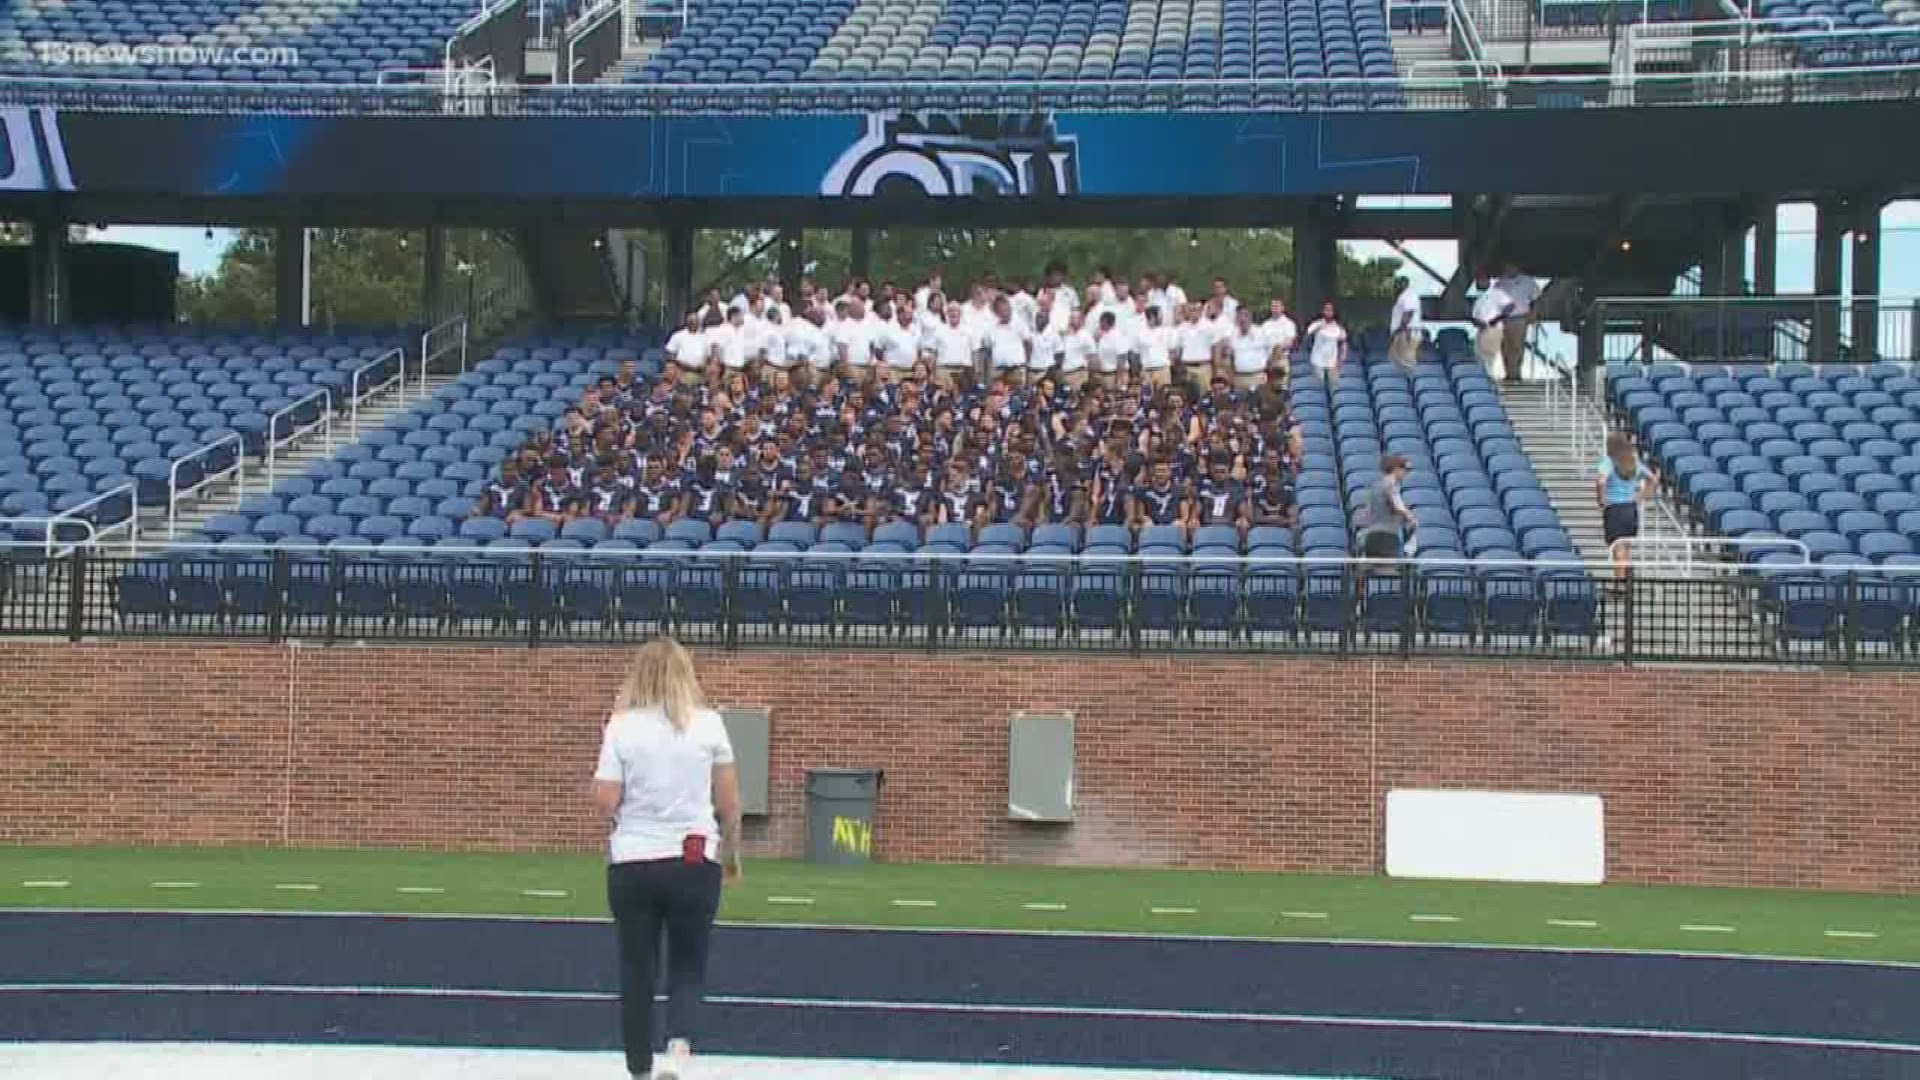 New team, new year and a like new stadium. ODU is just about set to play ball.